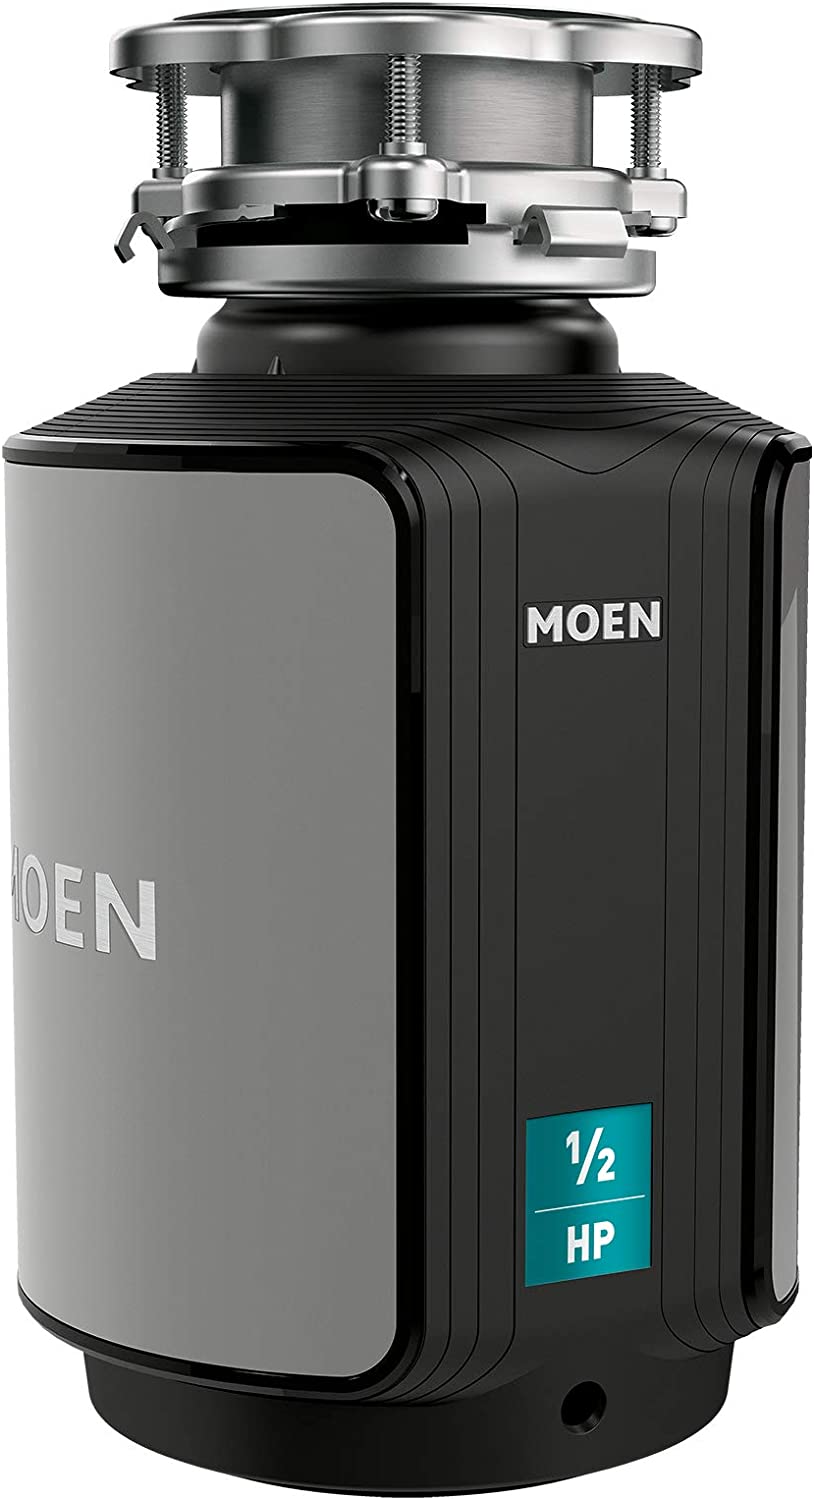 Moen Compact Garbage Disposal For Apartments